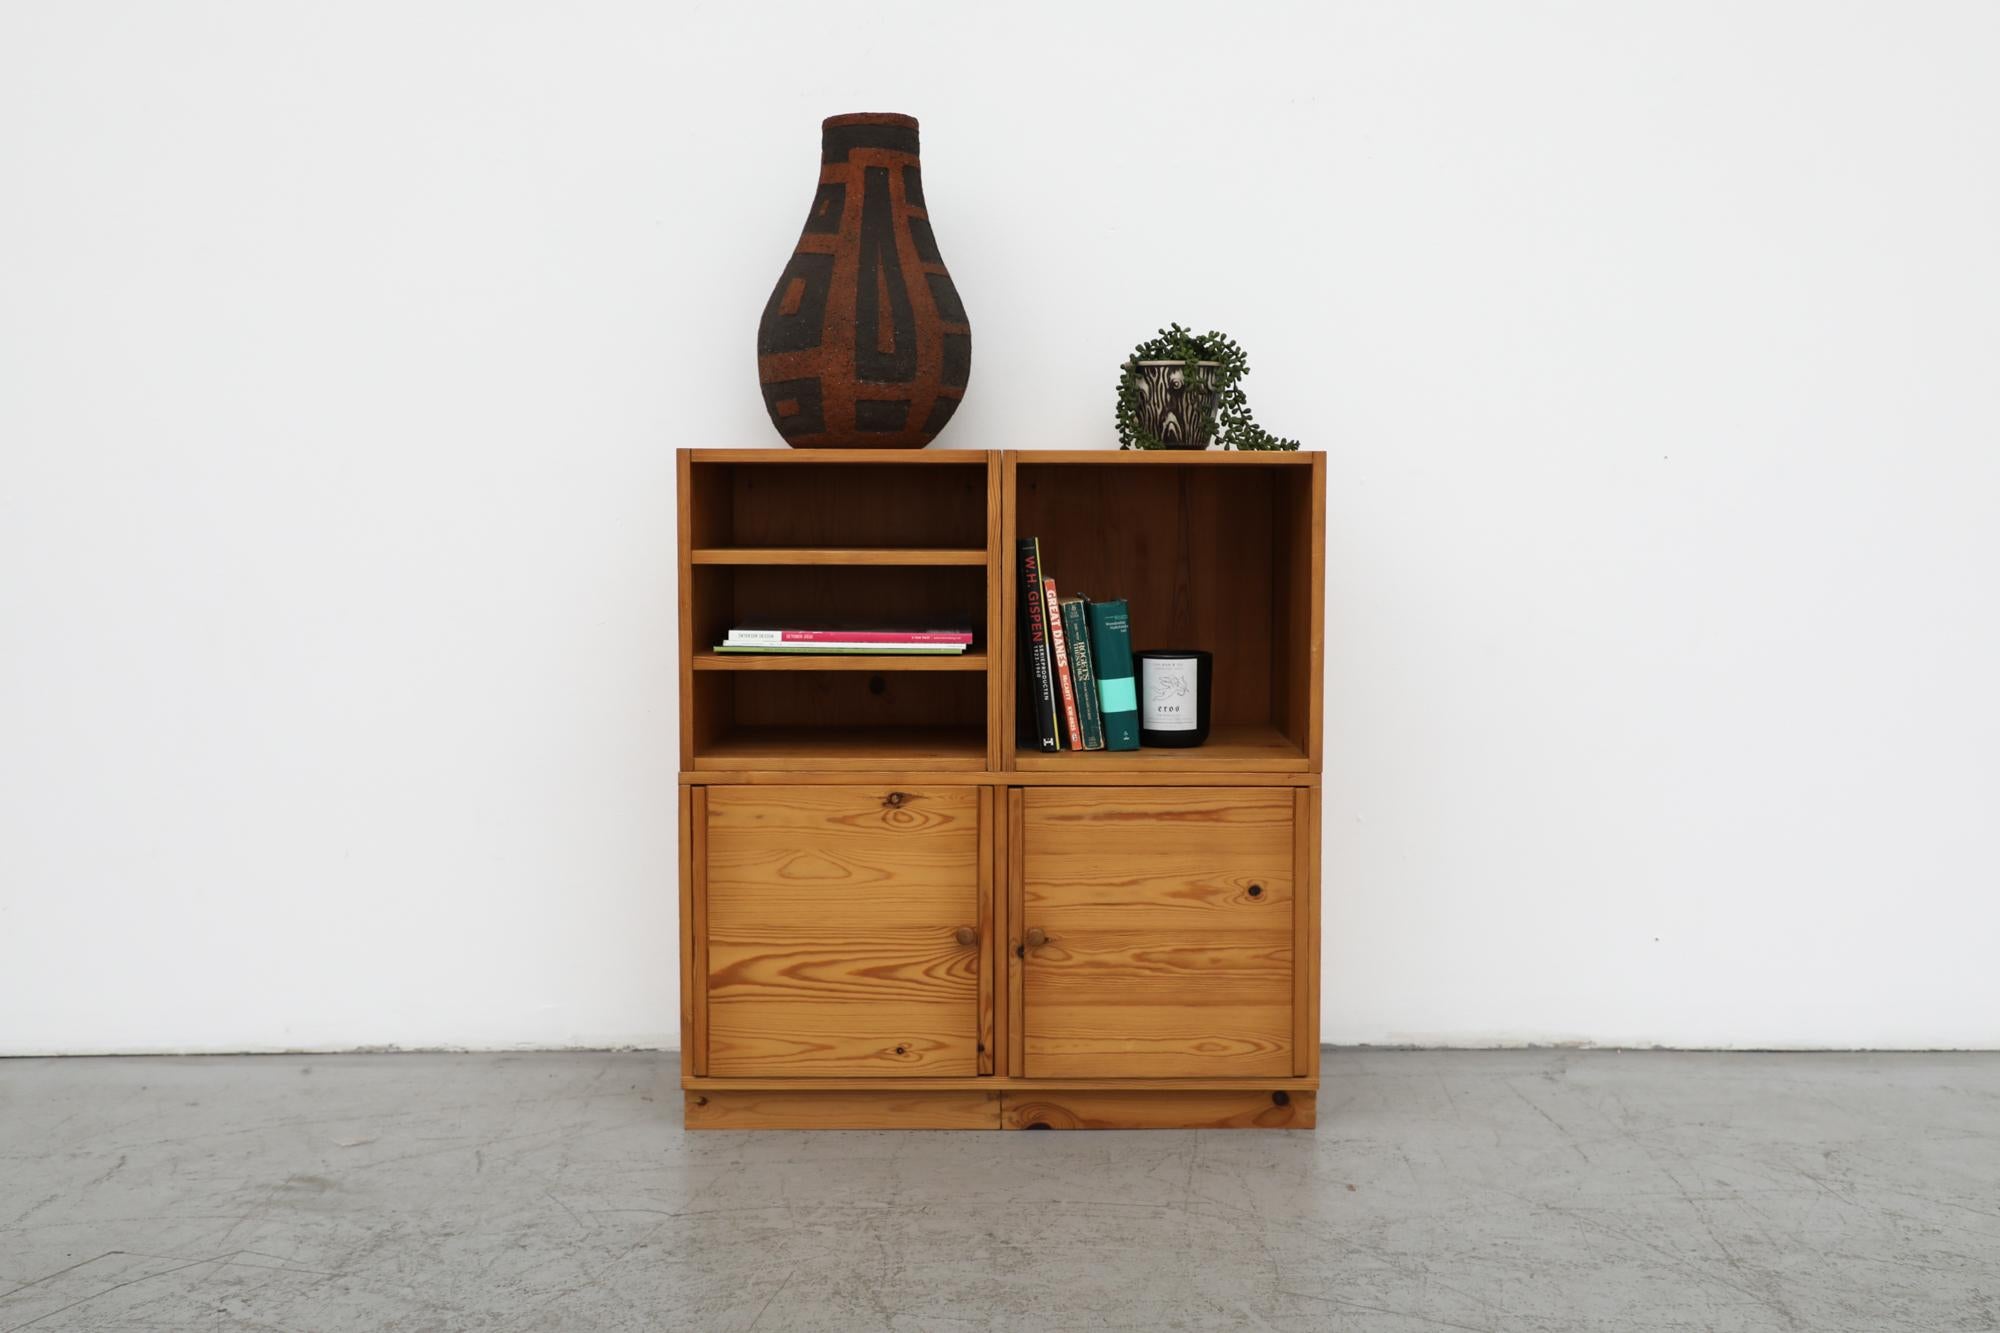 Ate Van Apeldoorn 3 piece pine cabinet set. One larger two door cabinet with  two smaller open cabinets on a square pine base. Cabinets can be wall mounted and reconfigured to your liking. Square pine base can be used if desired. Set has been